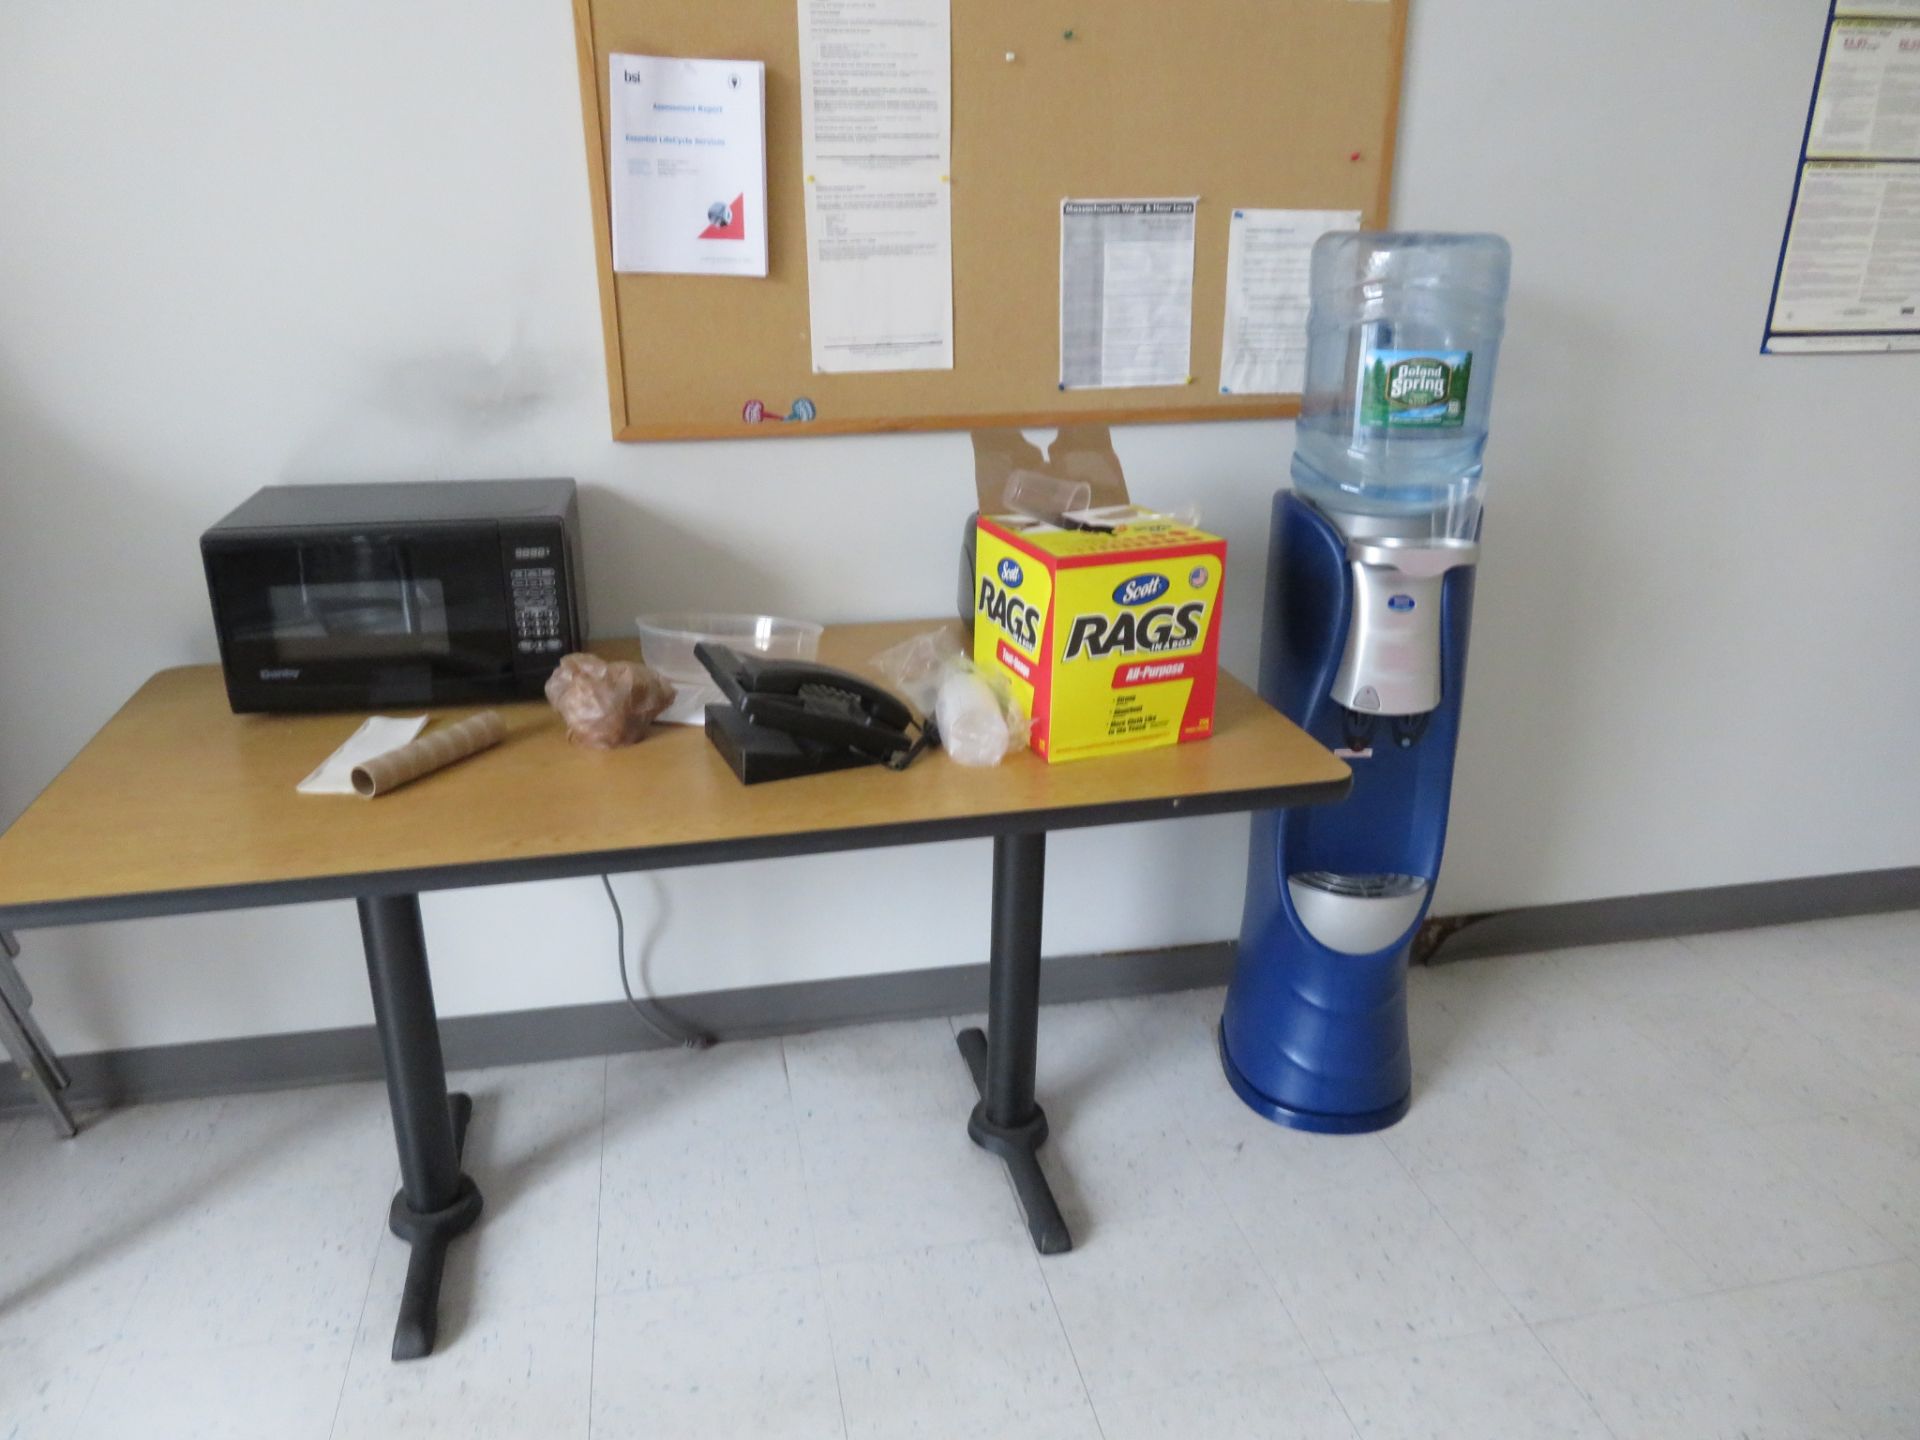 [LOT] (3) Microwaves, (2) Refrigerators, Rectangular Table (12) Chairs, Water Cooler, Hand Soap - Image 4 of 4